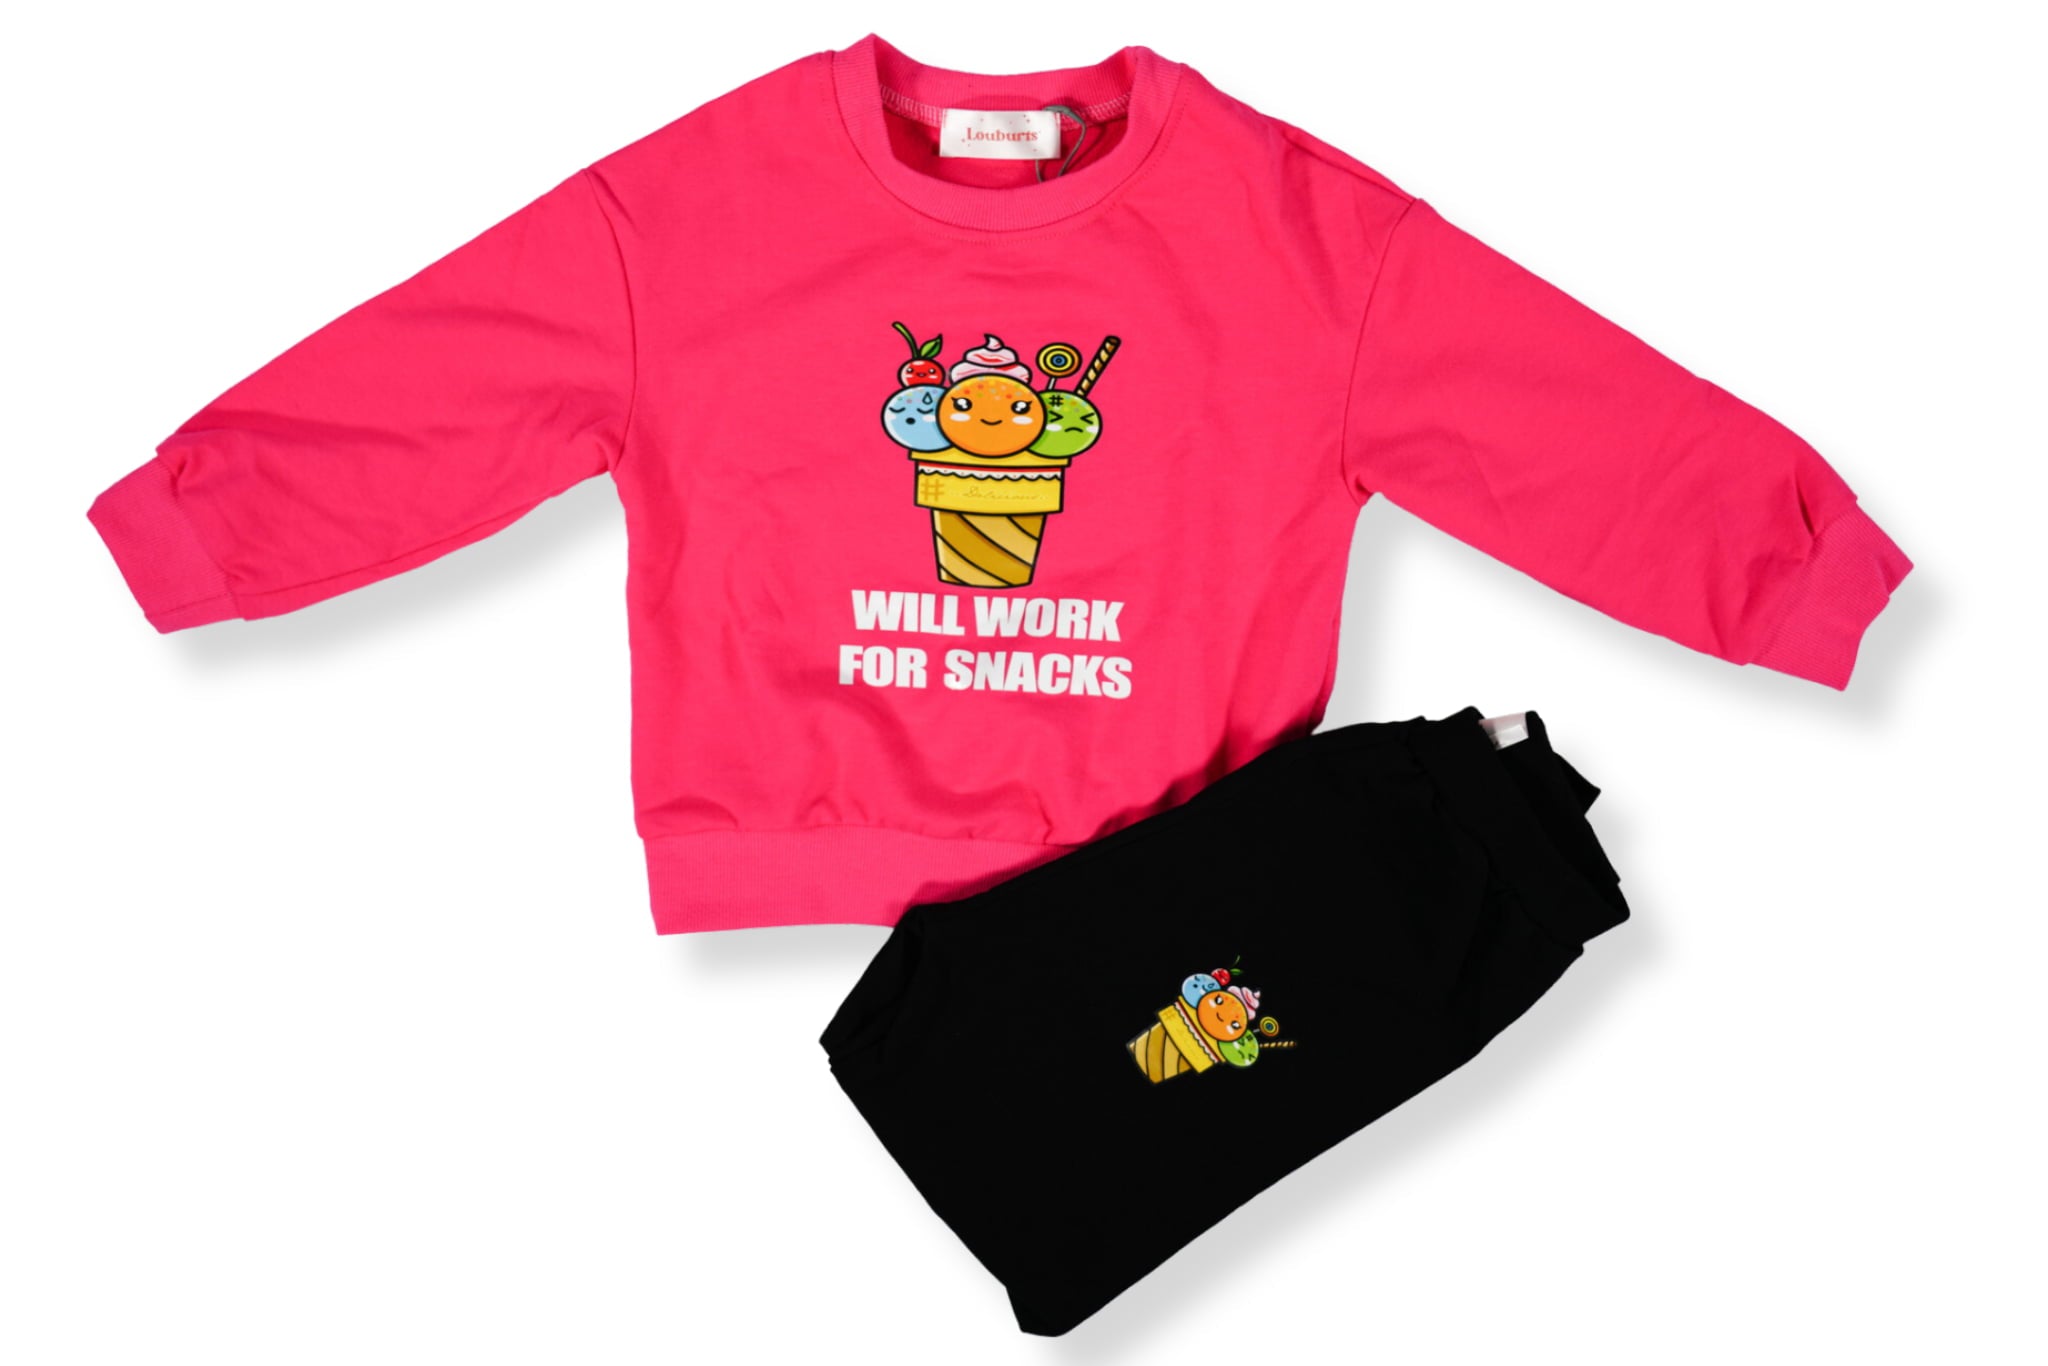 The Worker Sweatshirt and Pants for kids